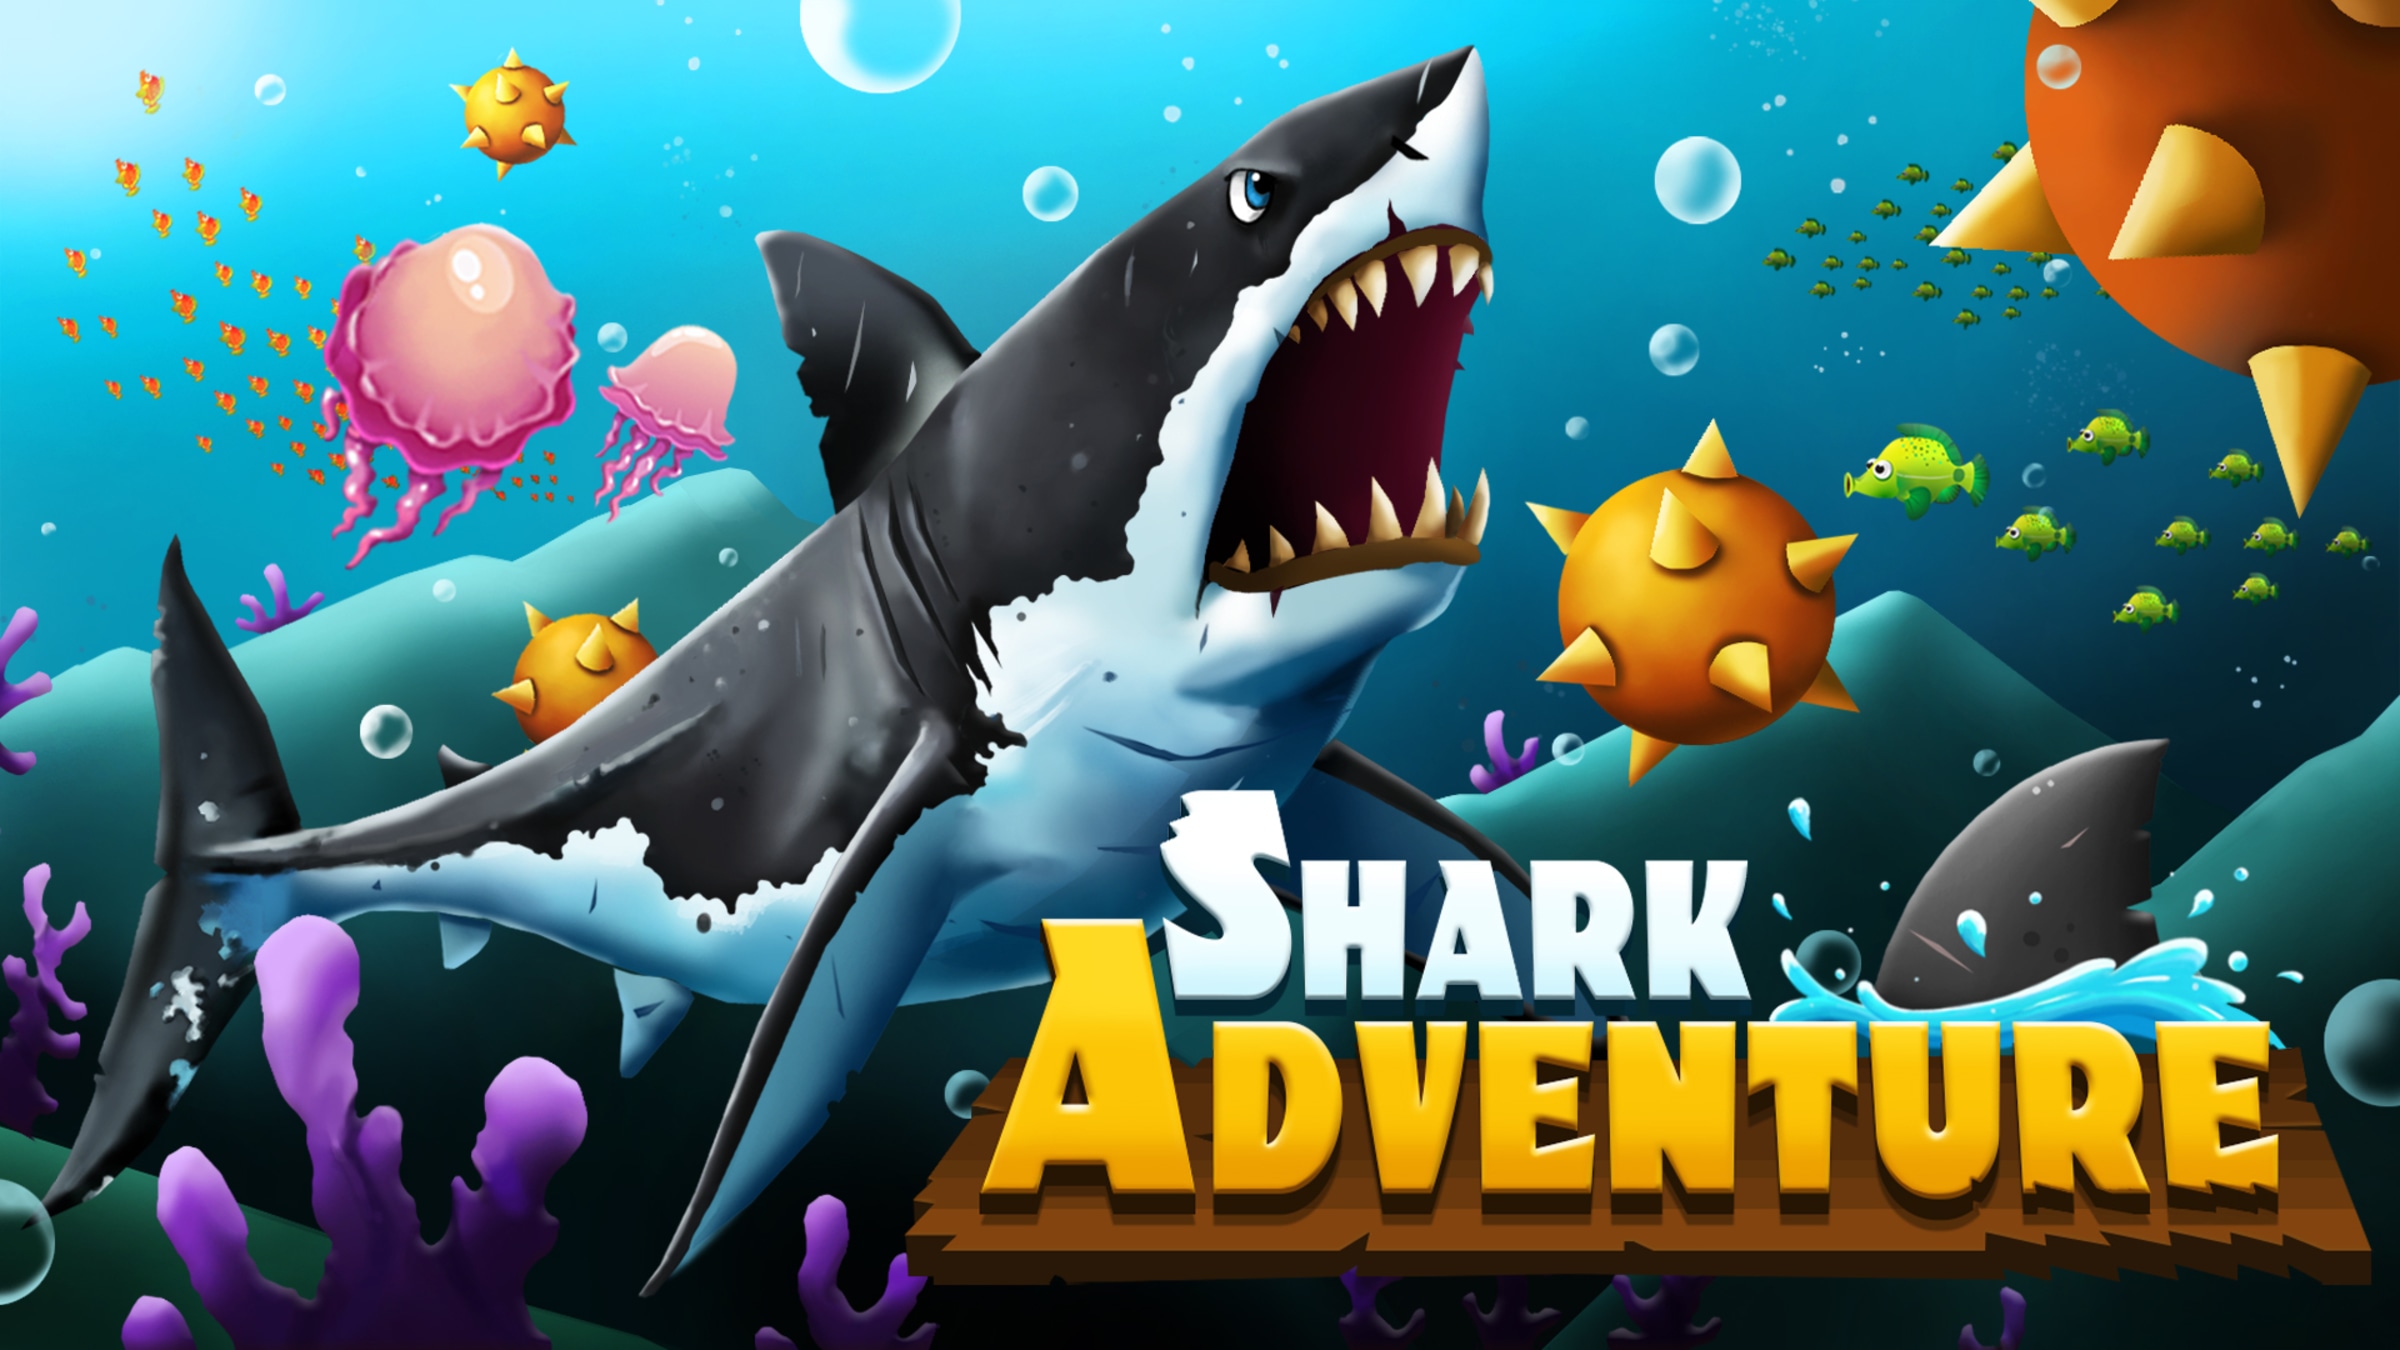 game shark, Video Games & Consoles